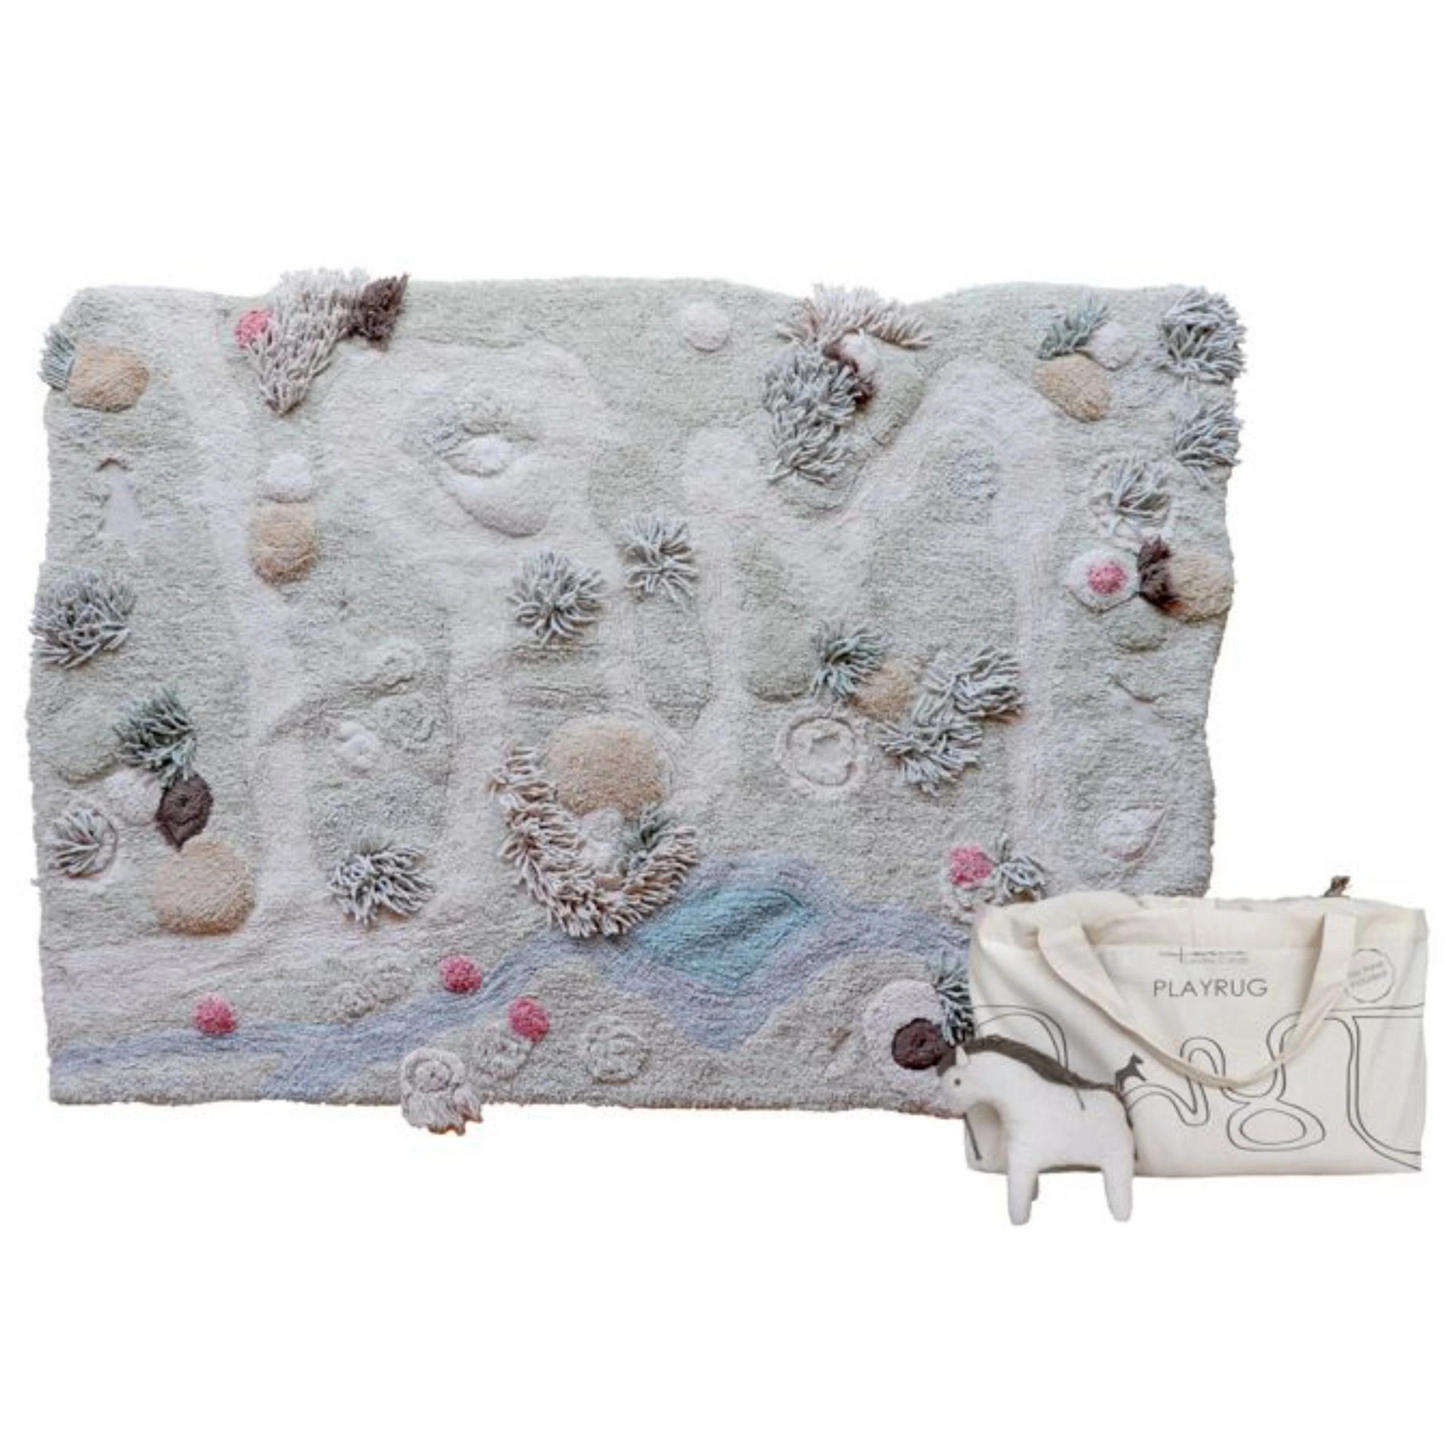 Washable Nature Path Textured Play Rug